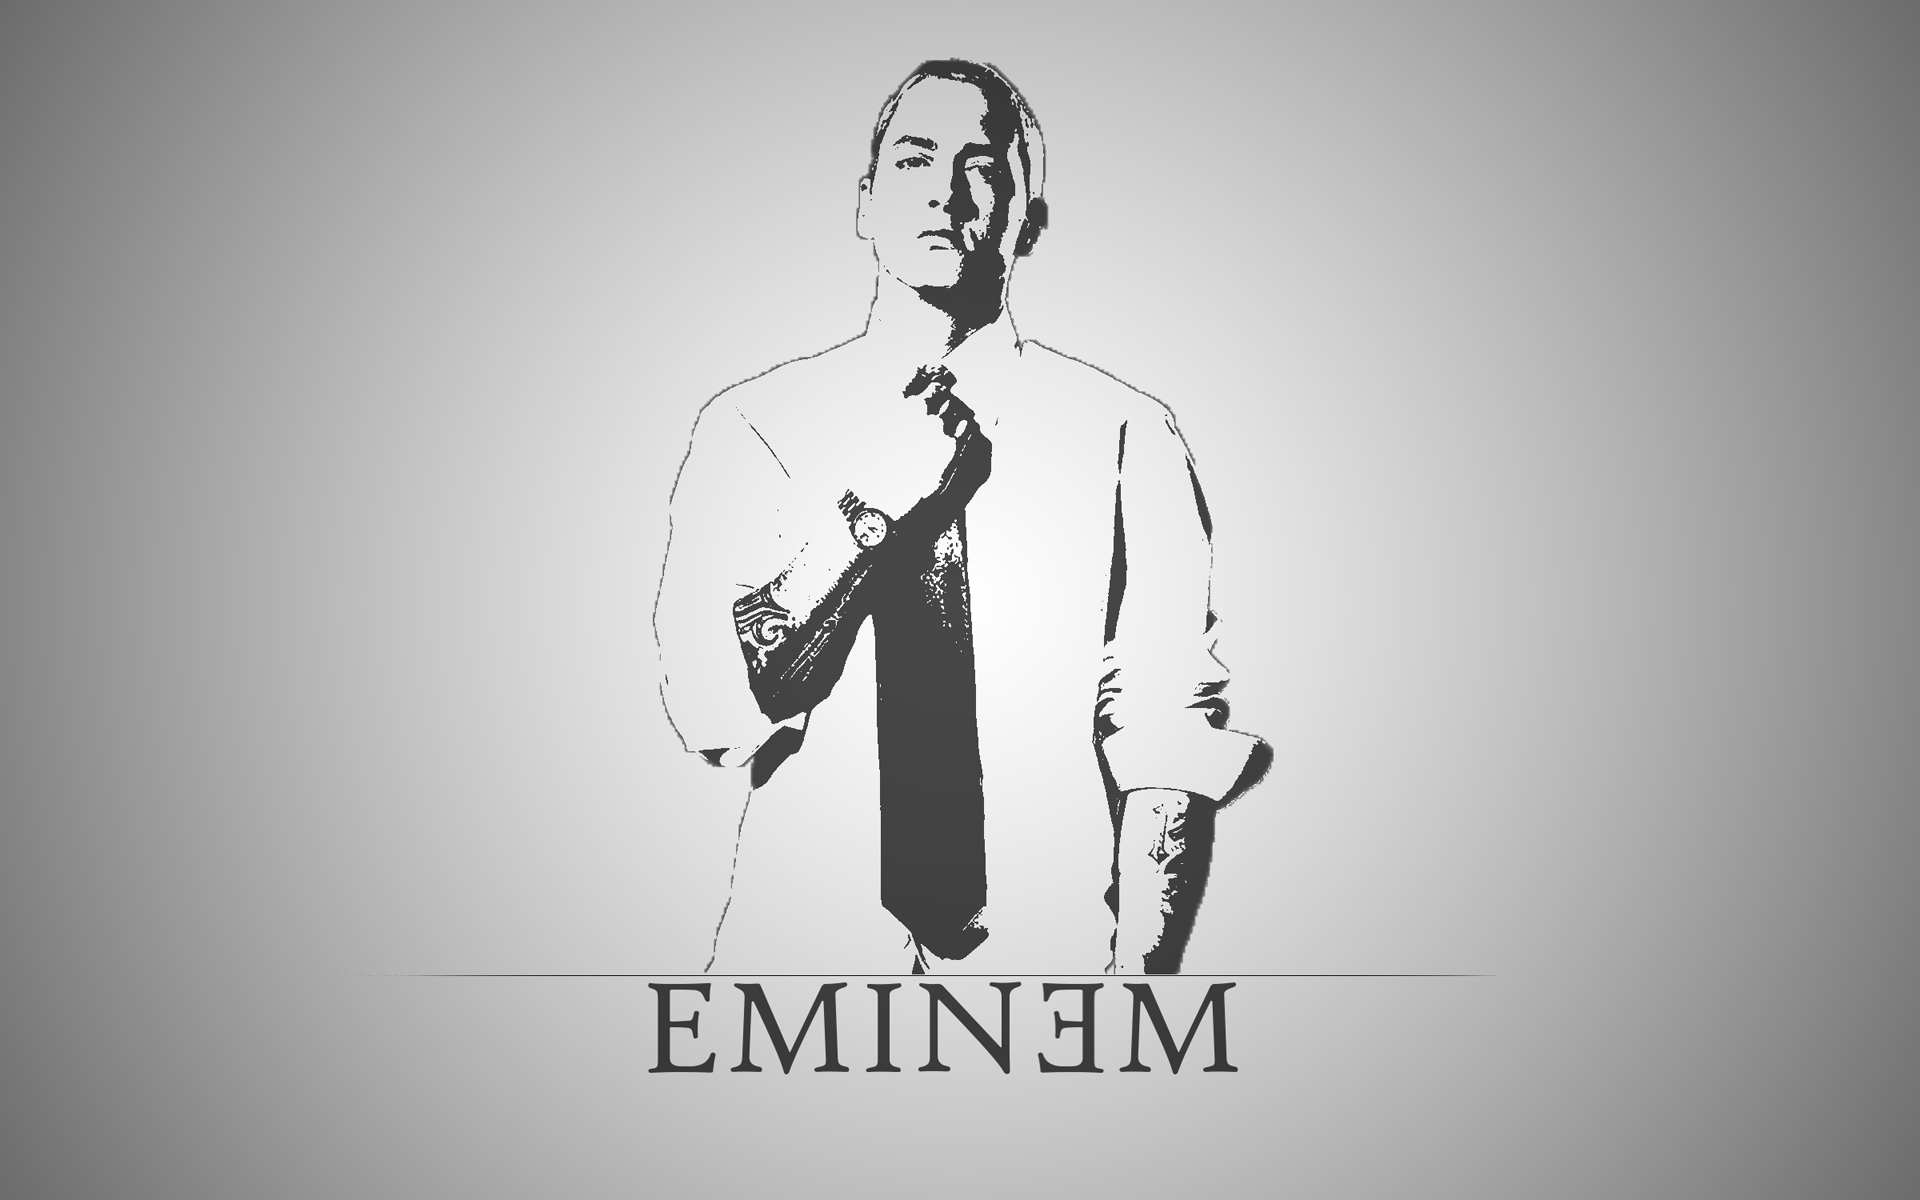 Eminem Wallpaper Background Pictures In High Definition Or